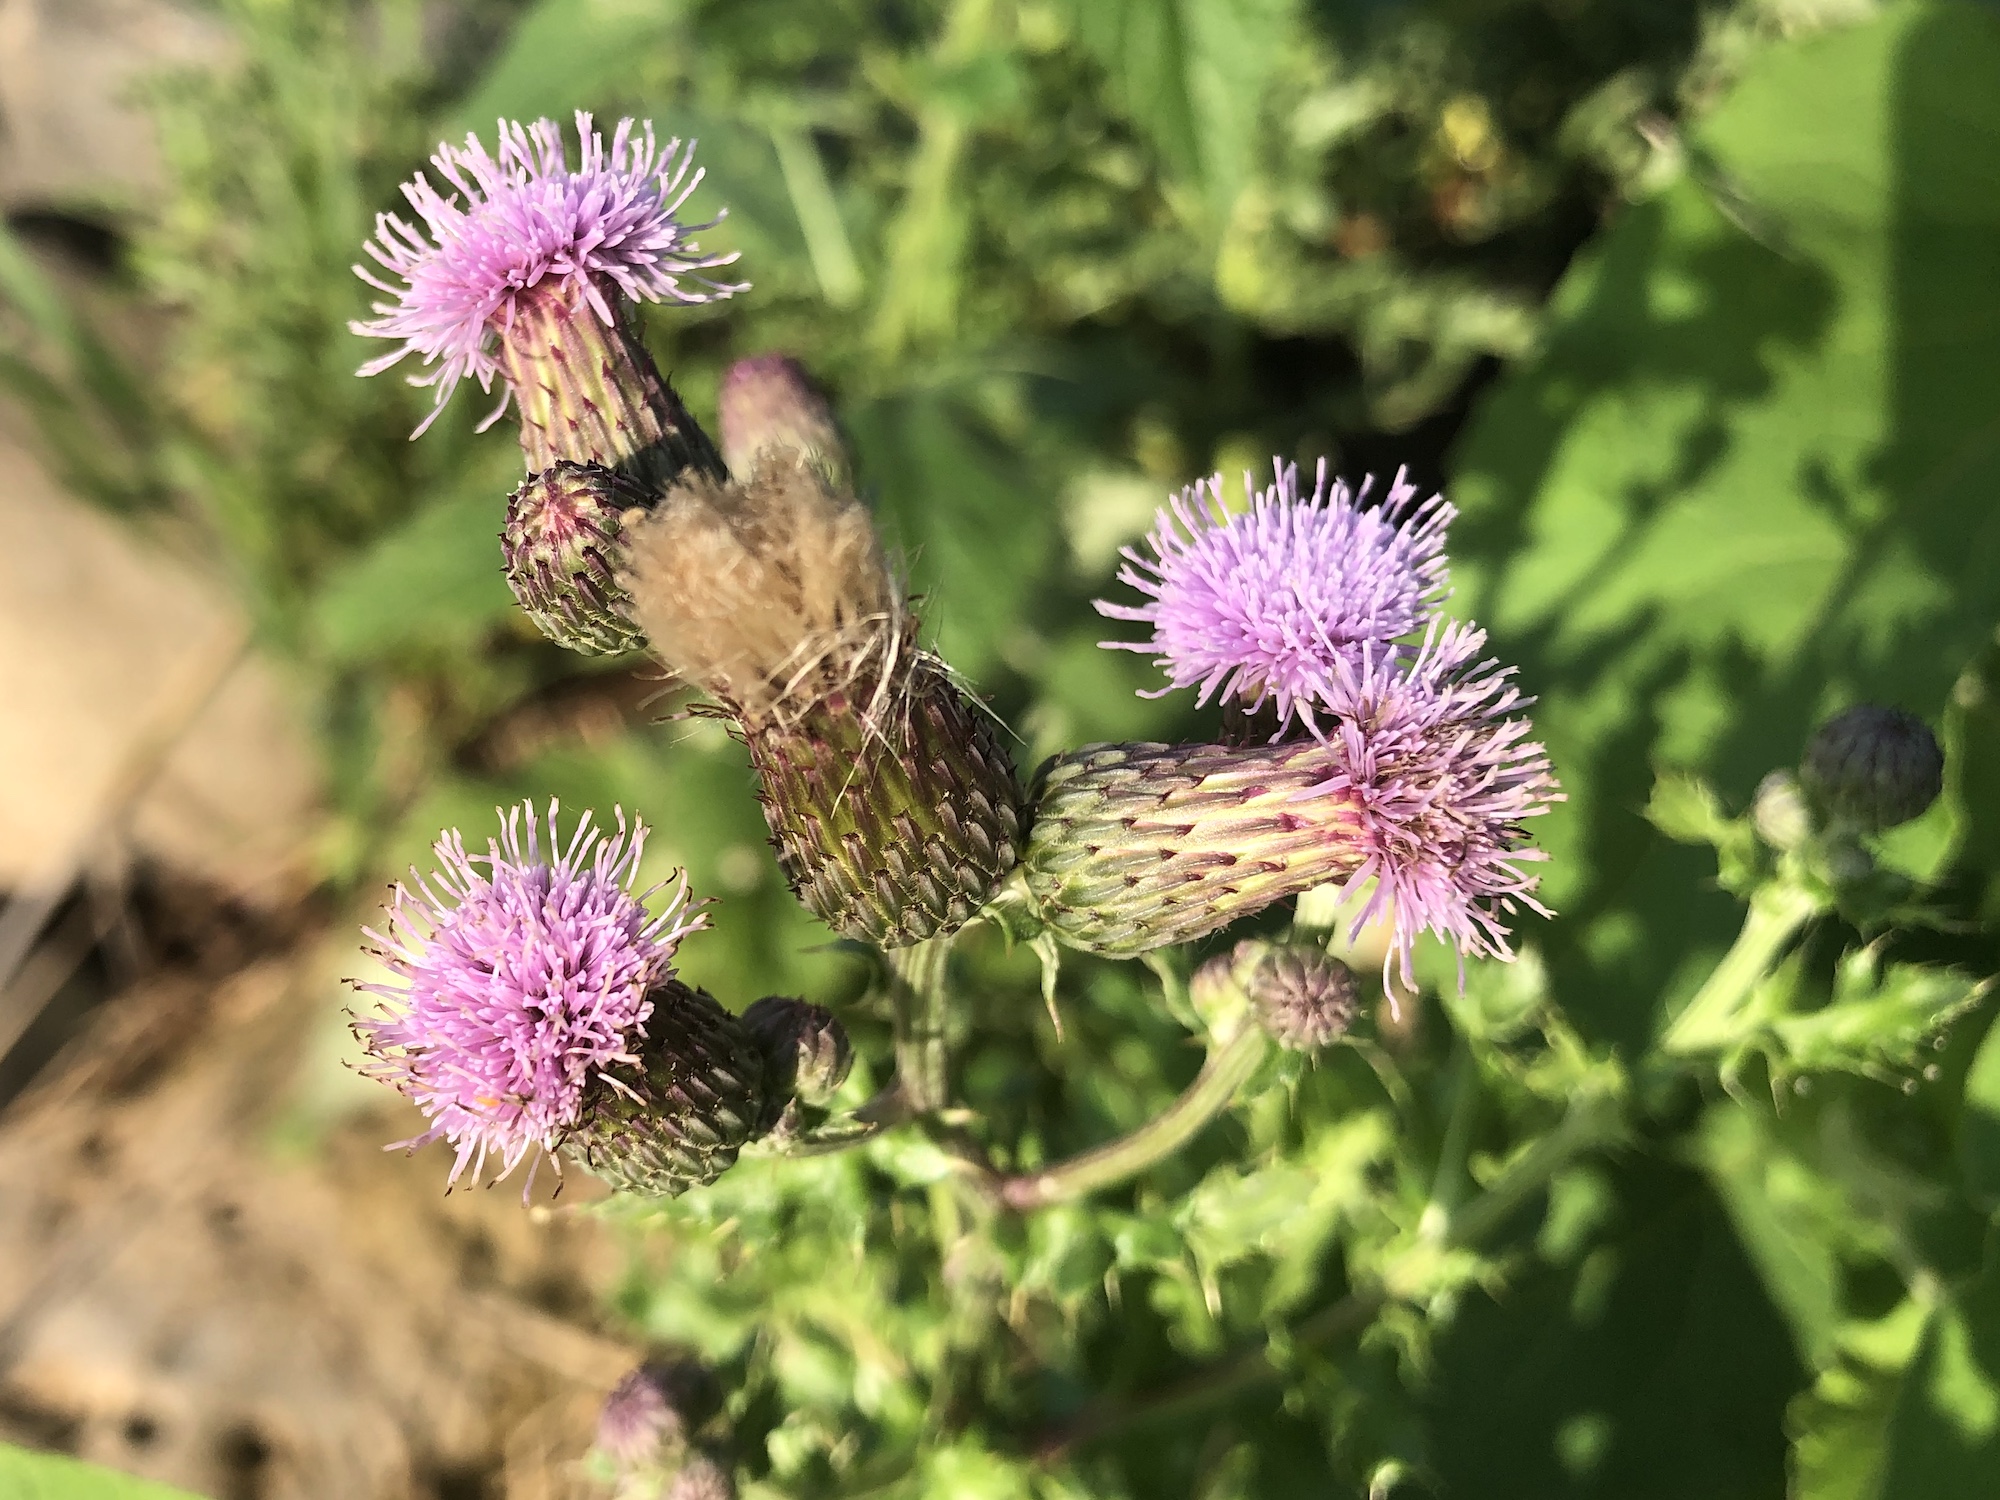 Canada Thistle on the shore of Lake Wingra in Wingra Park in Madison, Wisconsin on July 10, 2019.